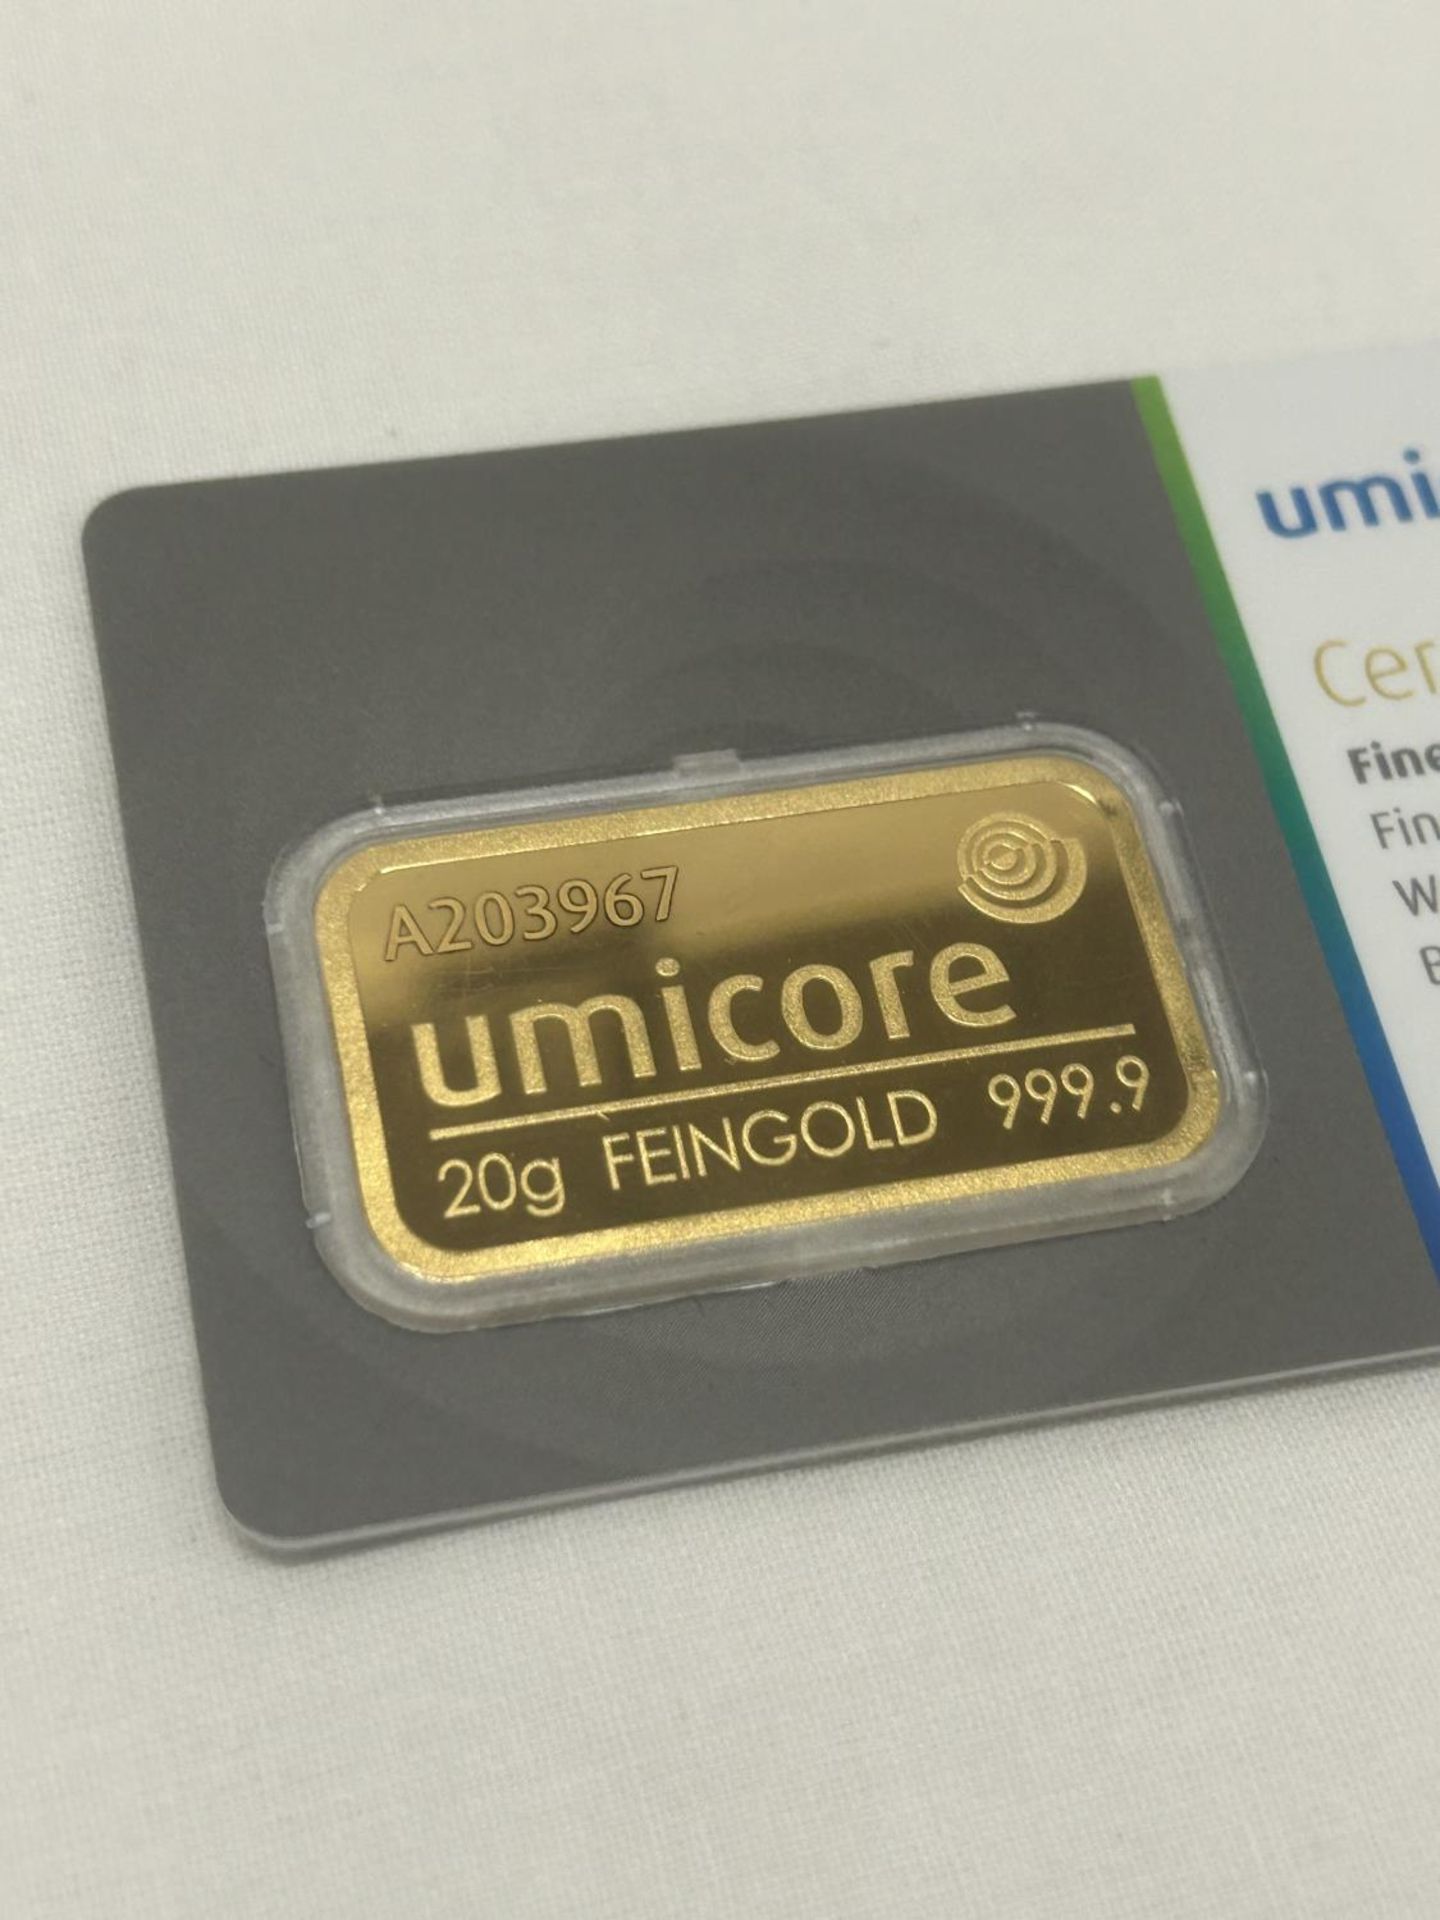 A 20G UMICORE FEINGOLD 999.9 GOLD BAR - Image 3 of 3